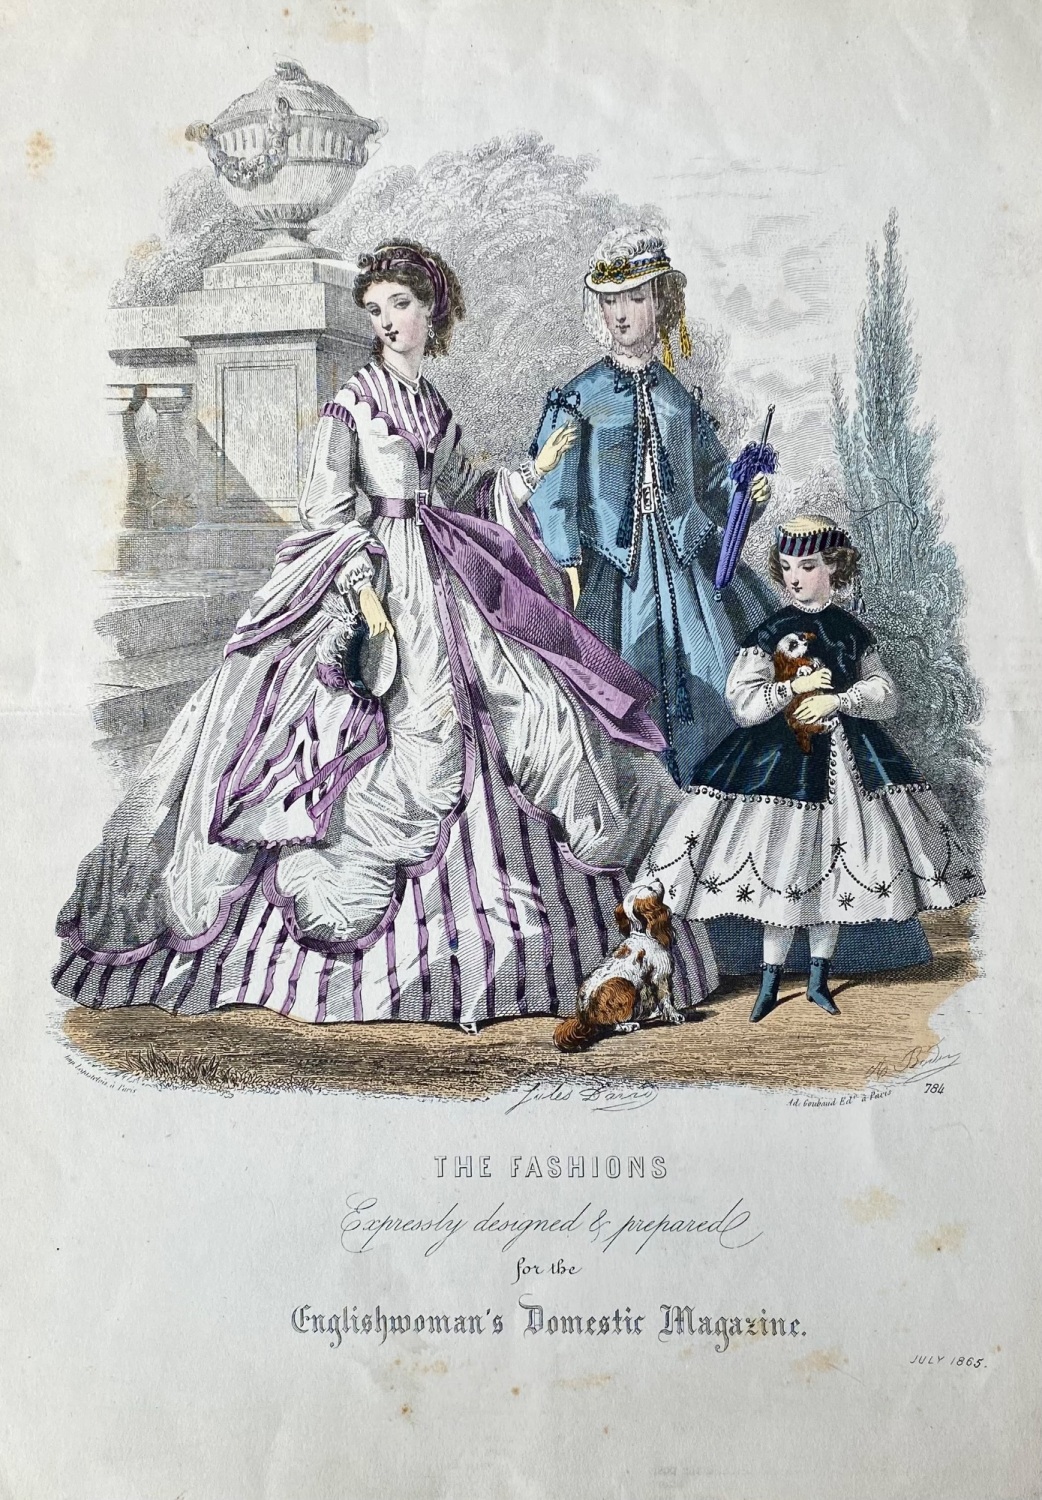 The Fashions Expressly designed & prepared for the Englishwoman's Domestic 